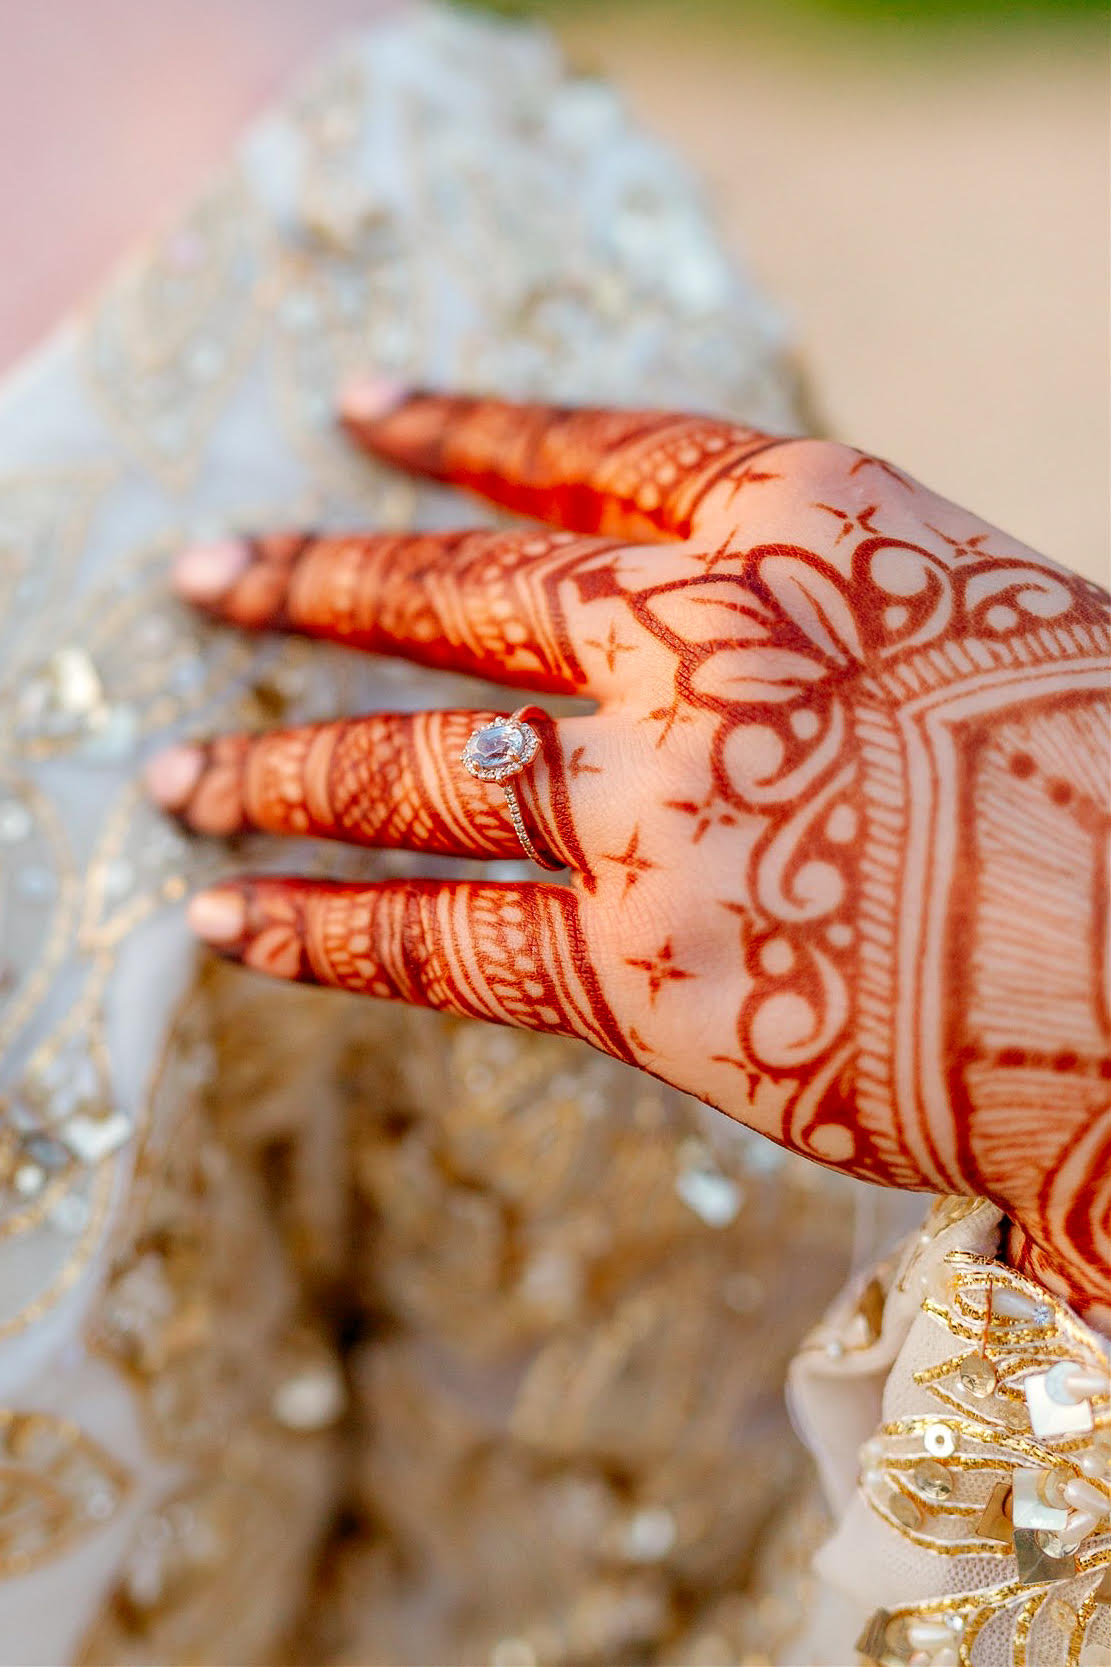 Closeup of a hand donned in henna.